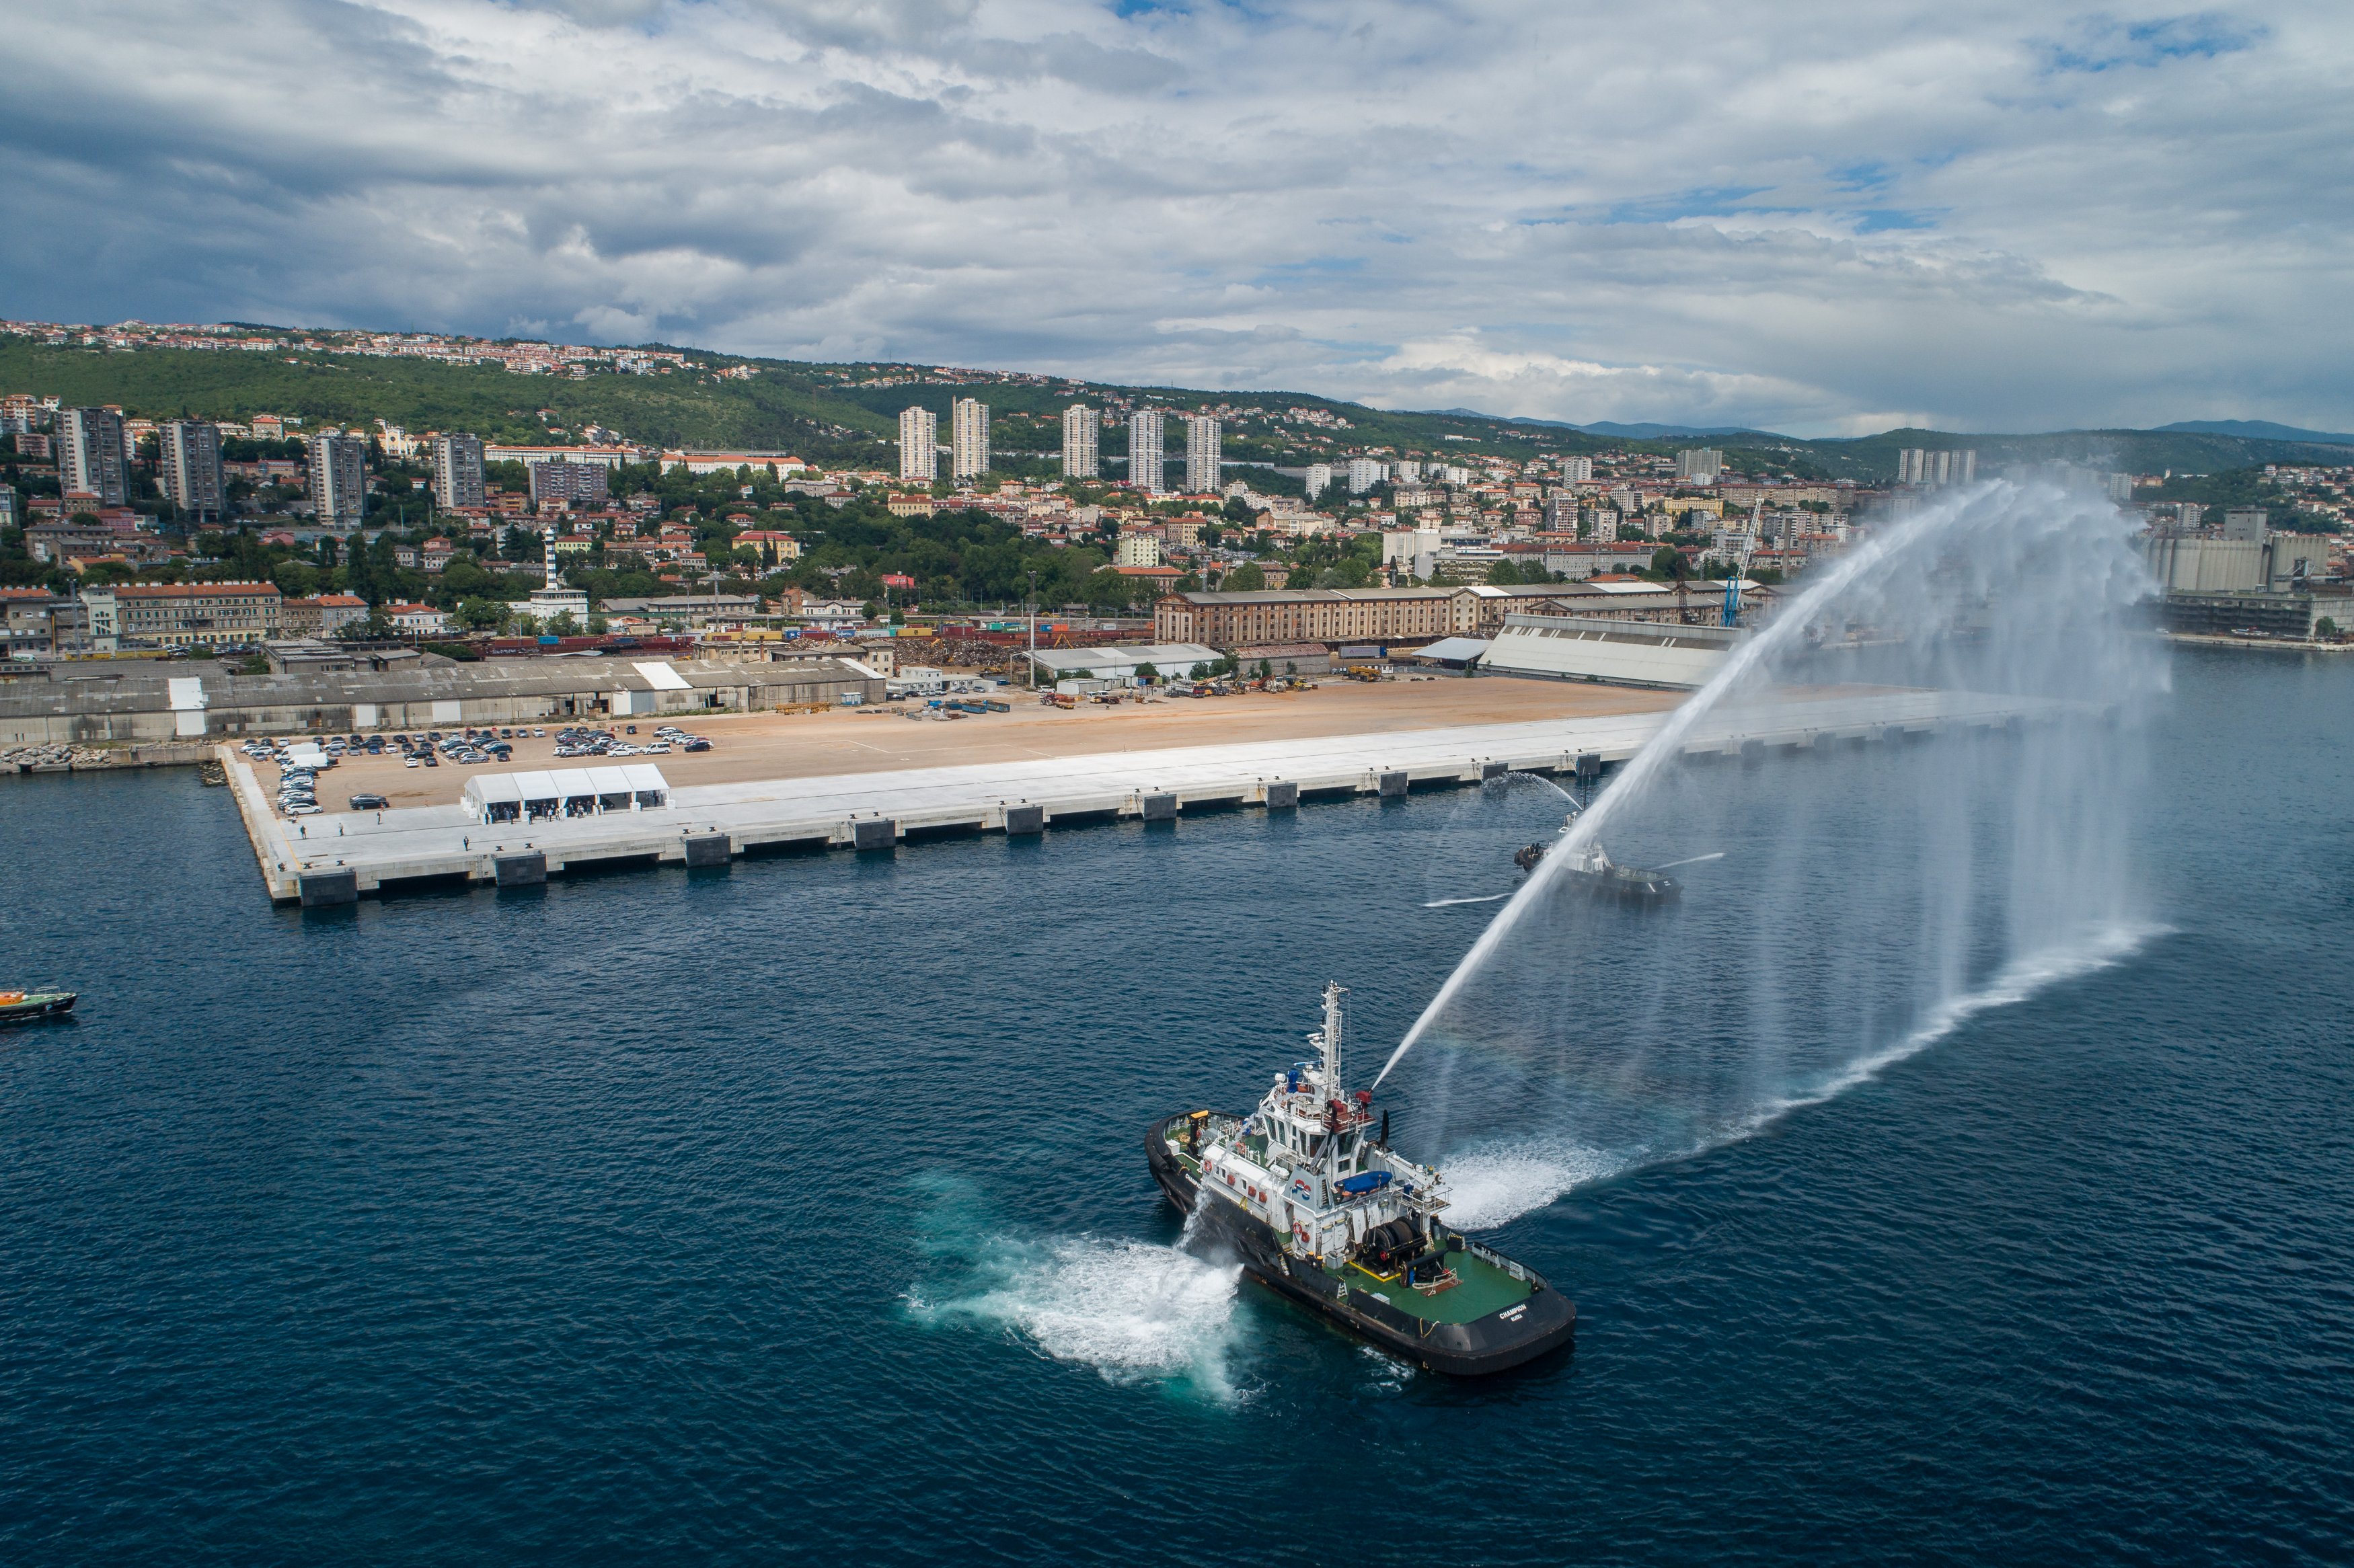 Completion of construction works on the Zagreb Deep Sea Container Terminal - Year 2019